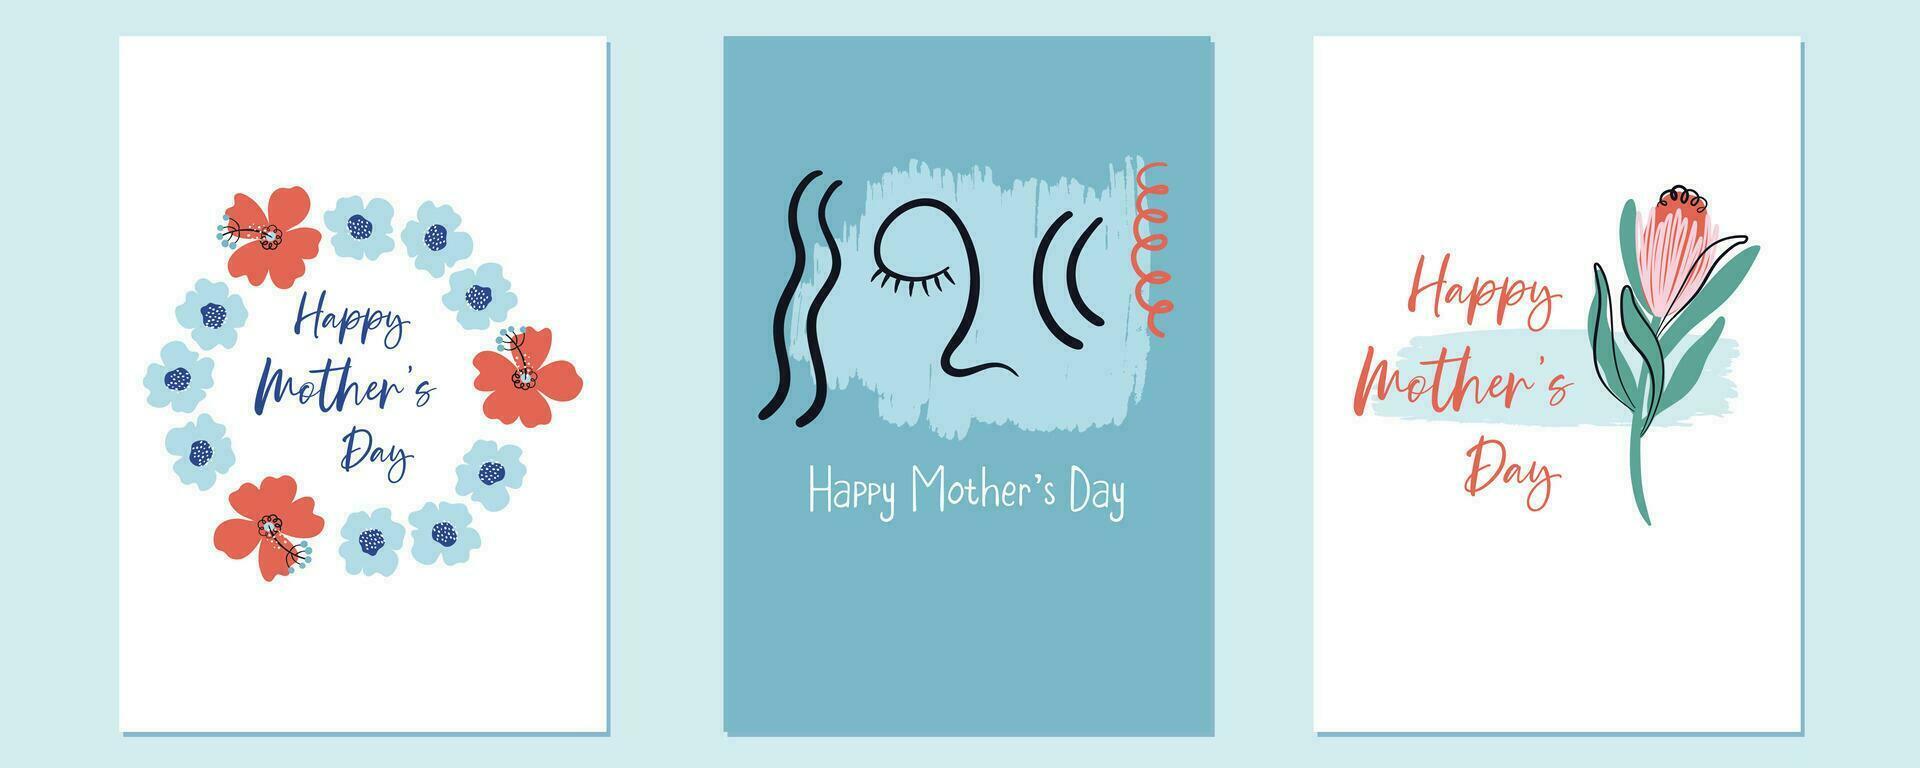 Happy Mother's Day. Holiday greeting cards. Vector illustrations for covers and posters. Cute prints for moms.